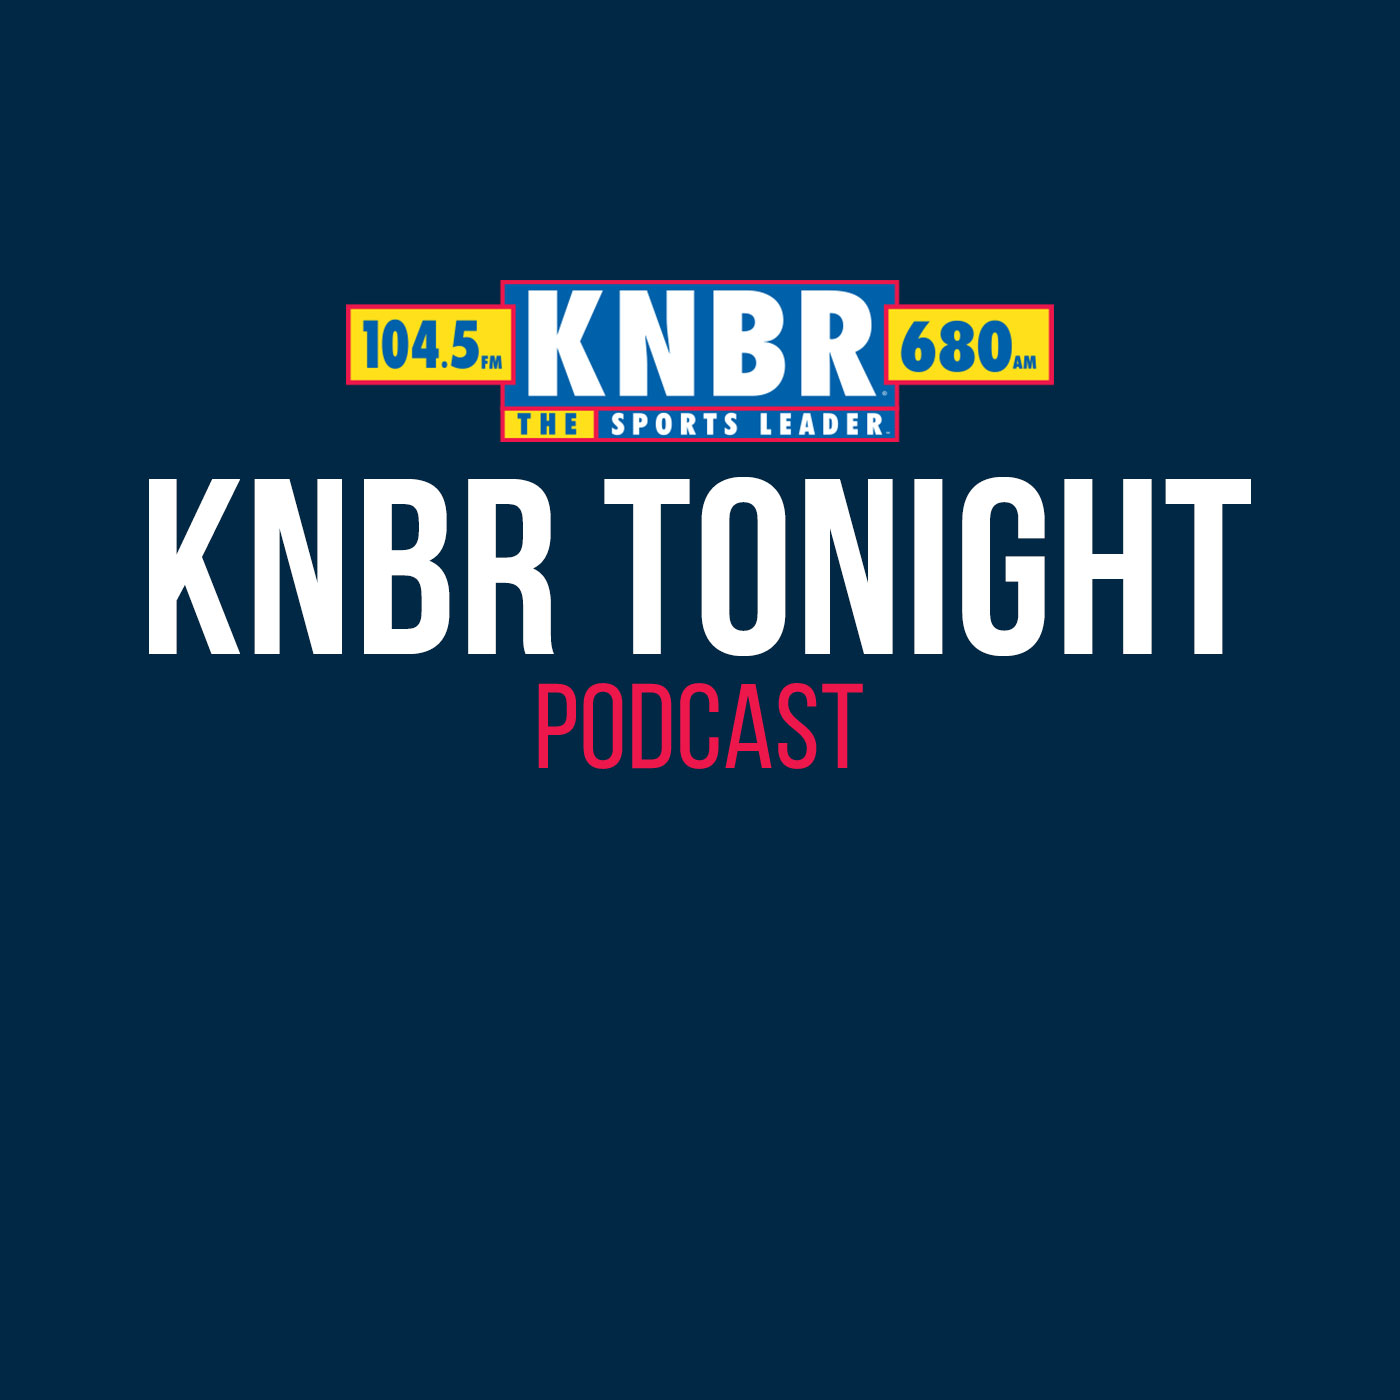 10-19 James Alexander "Sandy" Winnefeld Jr. joins KNBR Tonight with FP  to talk about this weekend's Game for Heroes Celebrity Softball Classic raising funds to support for the programs of The Tug McGraw Foundation and Guy Fieri Foundation benefitting veterans and first responders.